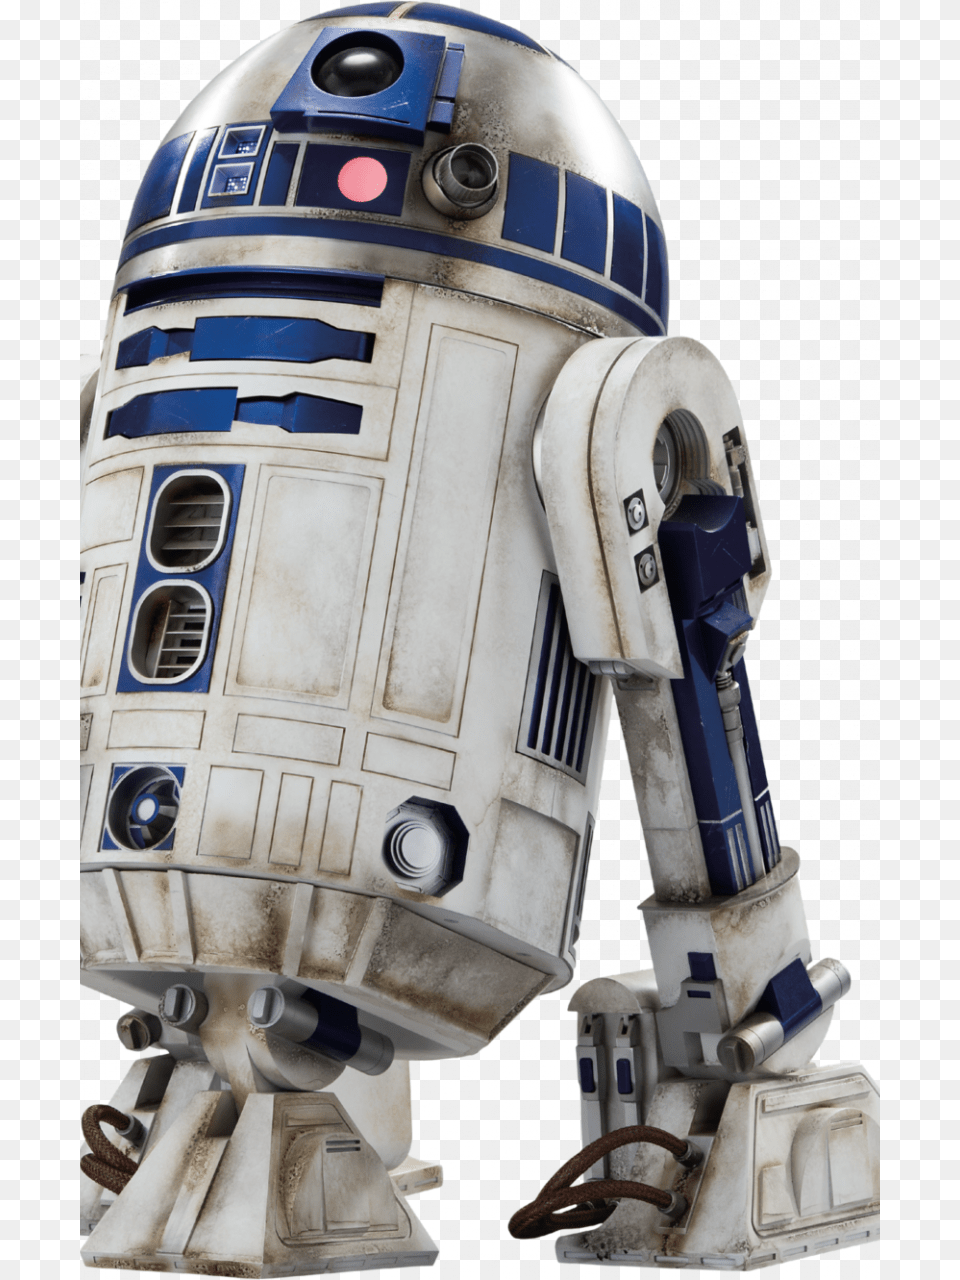 D2 Star Wars Ep7 The Force Awakens Characters Cut Star Wars Characters, Robot, Railway, Train, Transportation Free Transparent Png